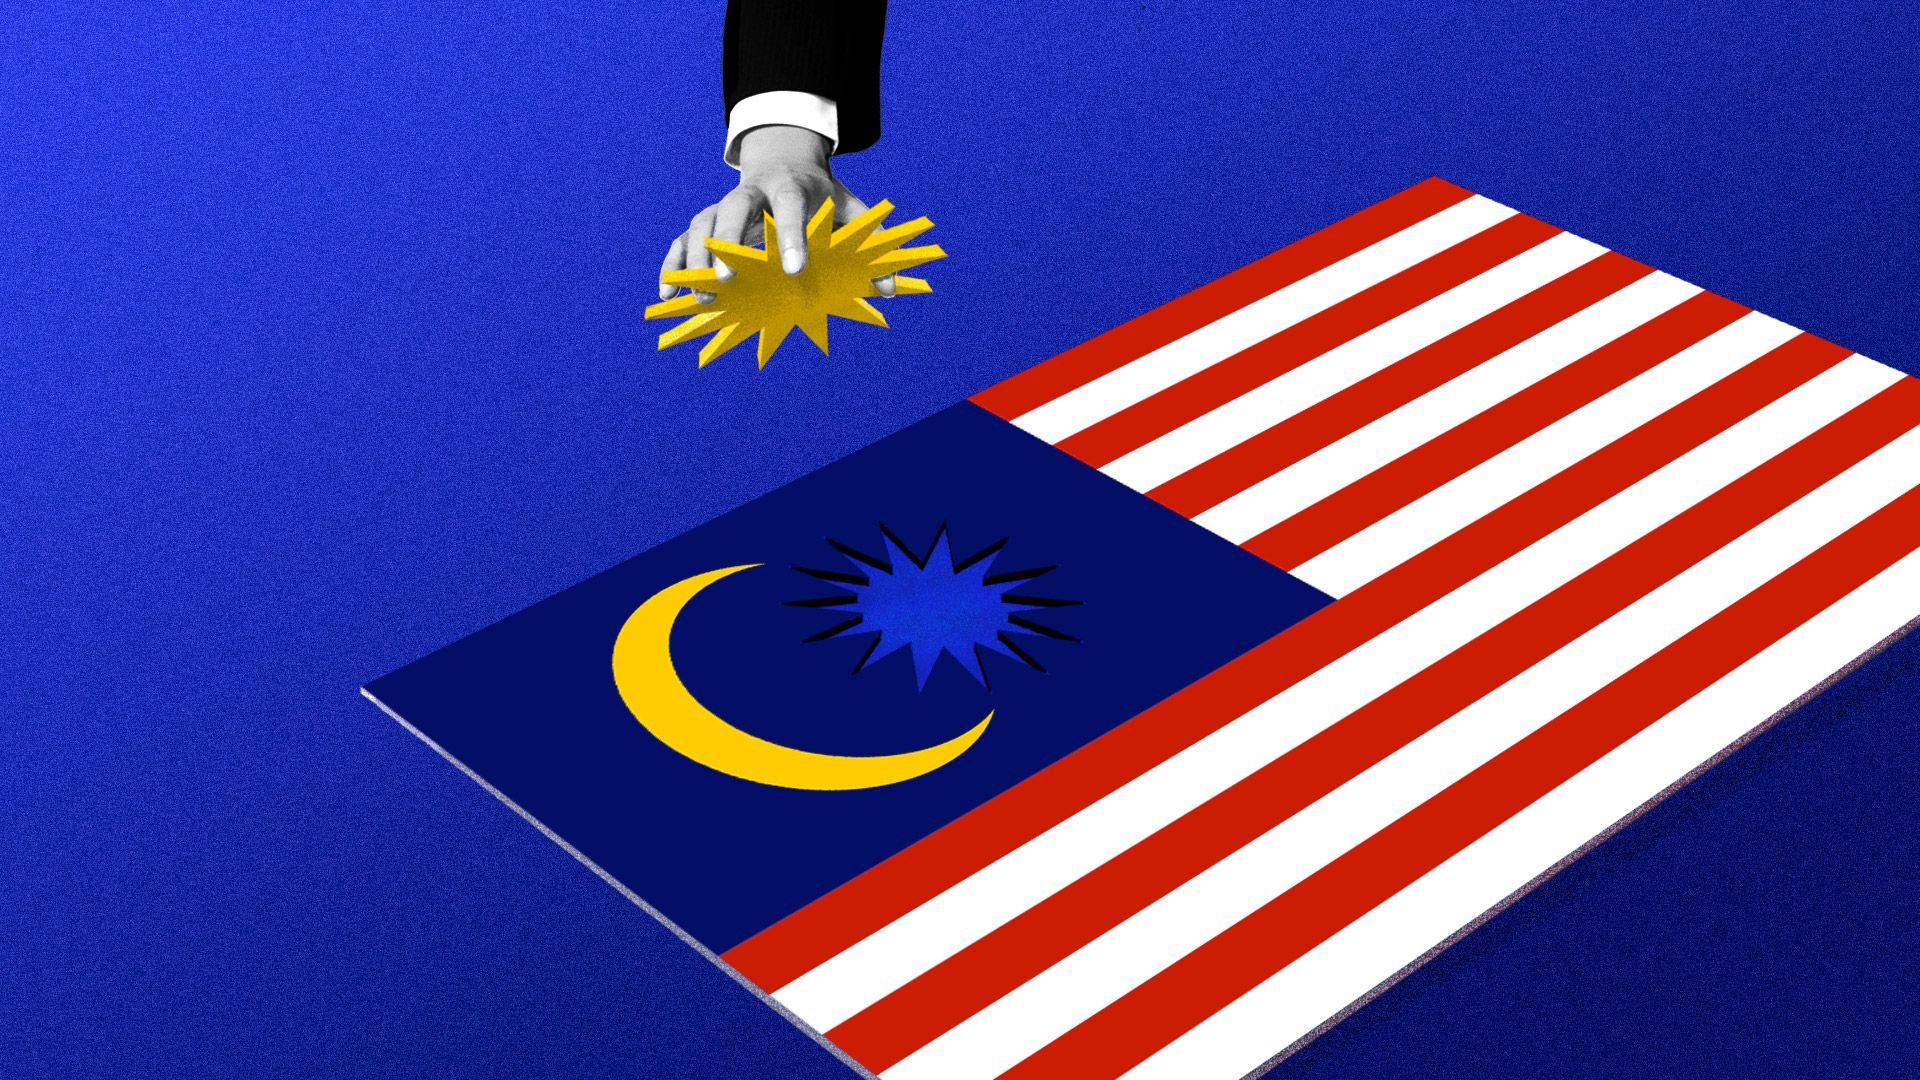 An illustration of combining the Malaysian and US flags, with a hand reaching out